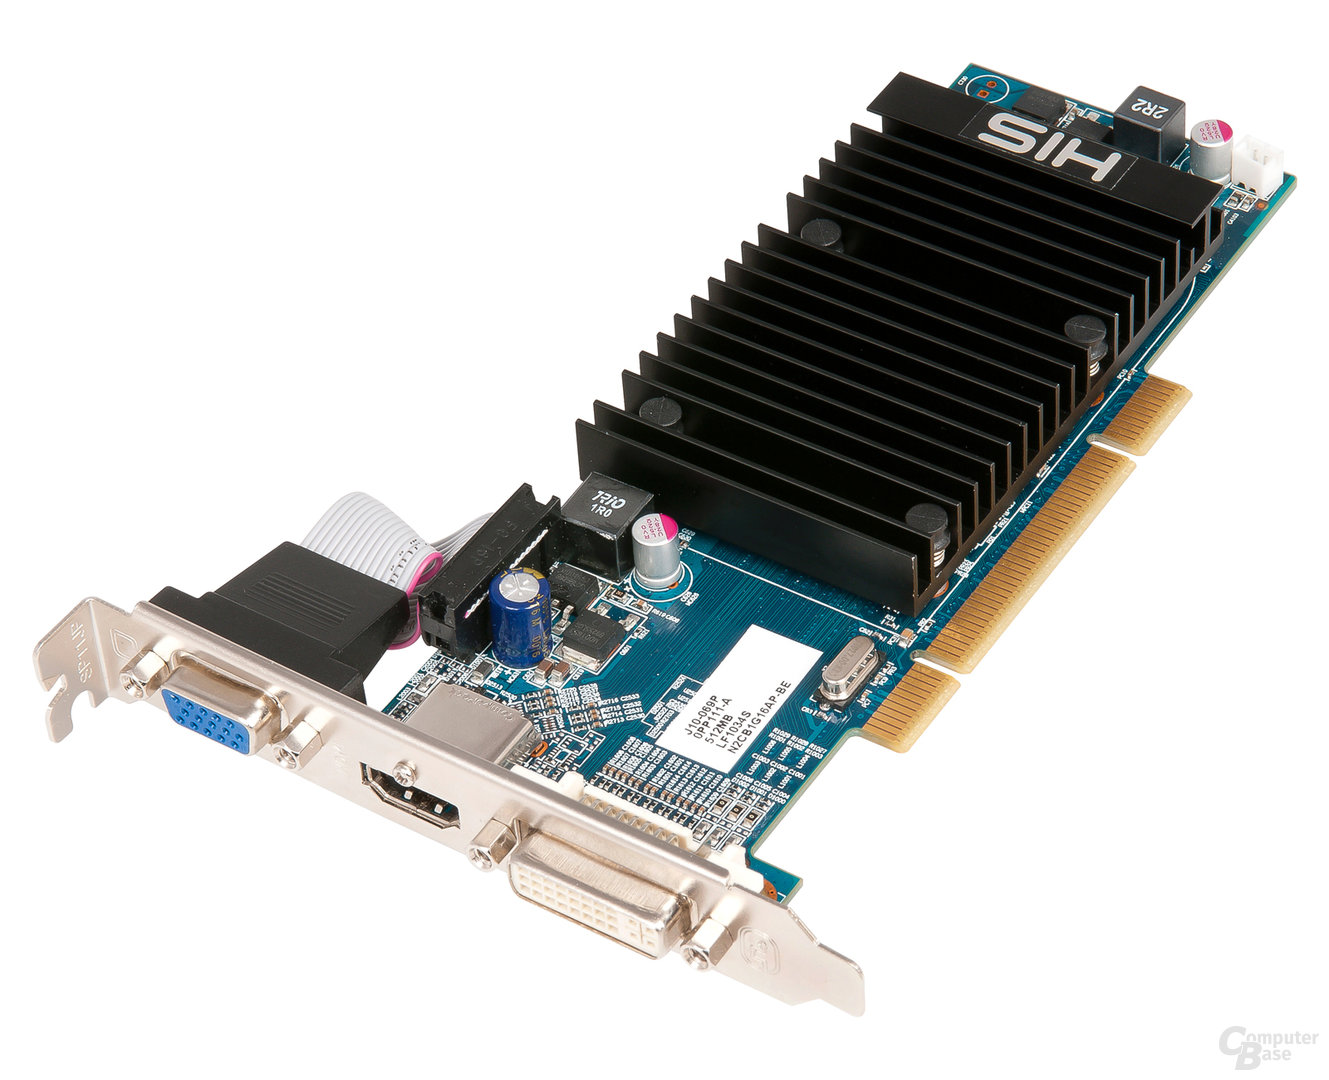 HIS 5450 Silence 512 MB DDR3 PCI